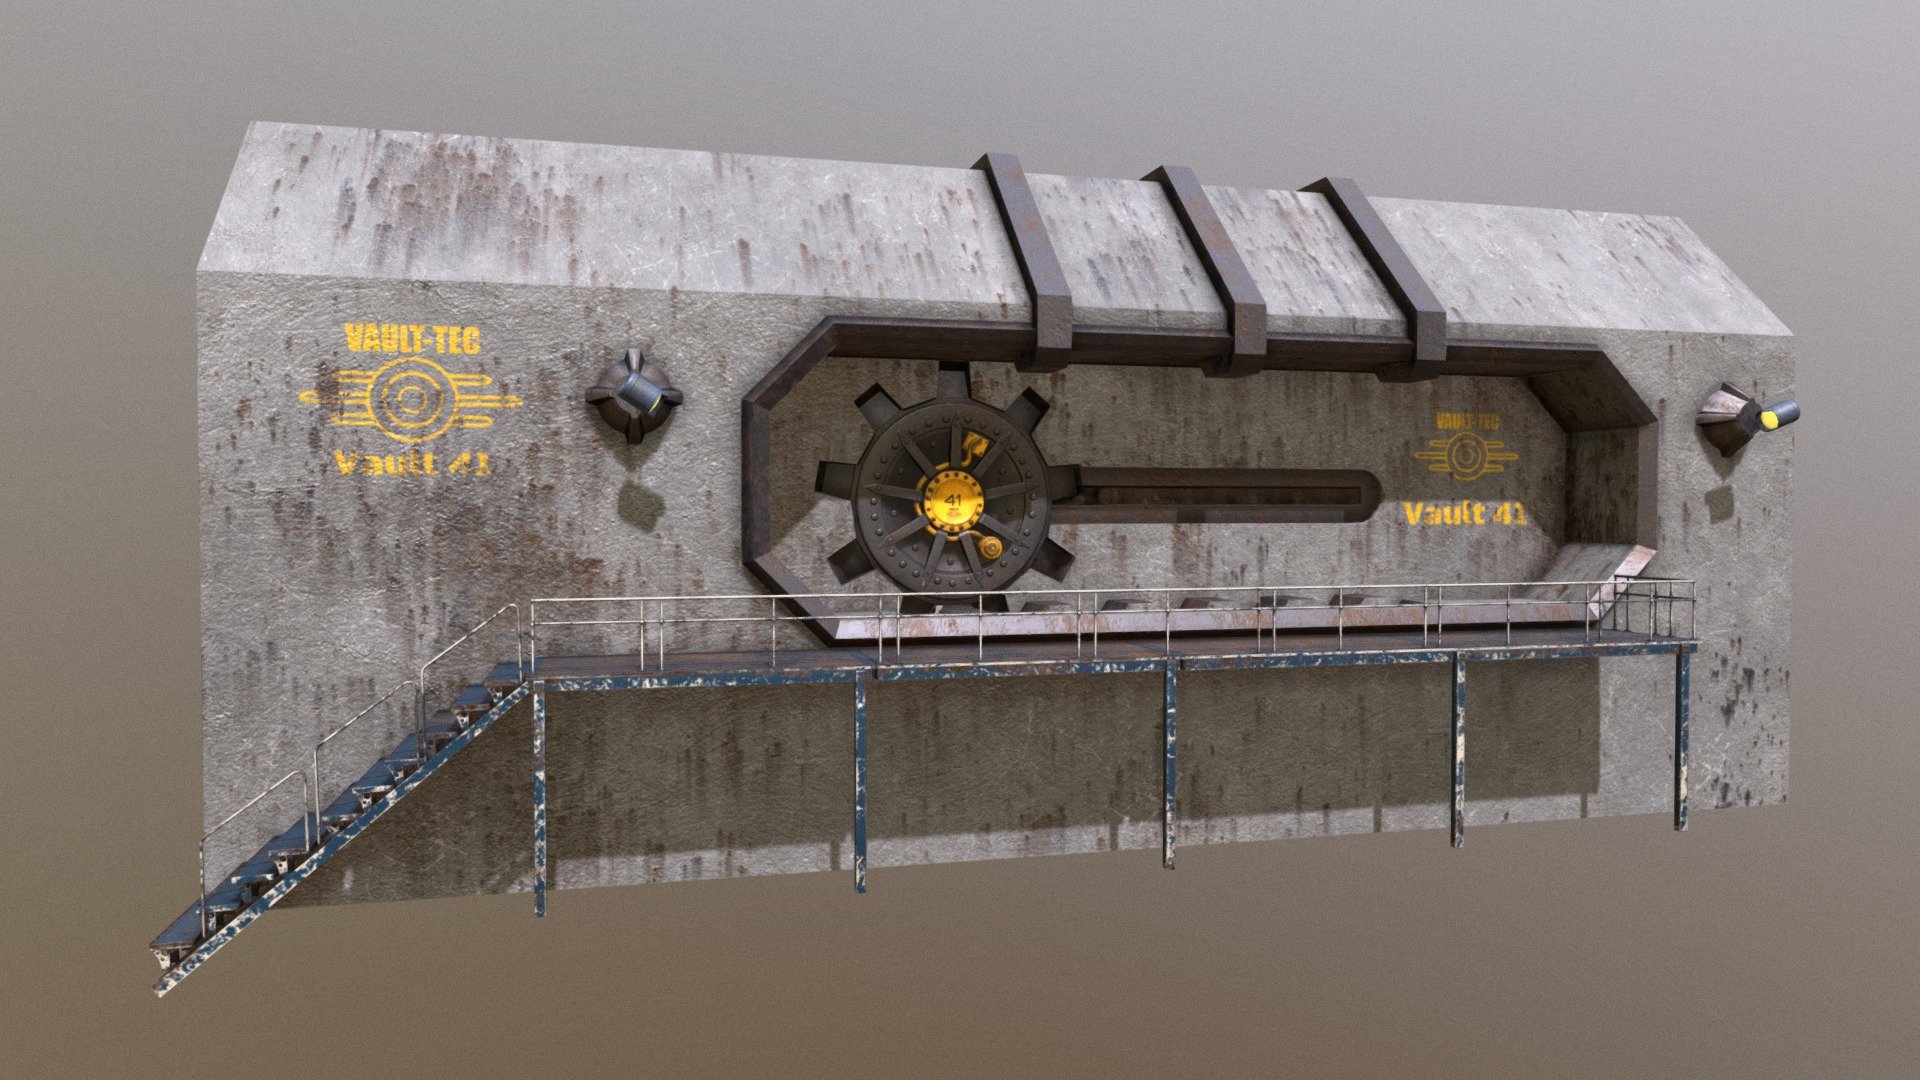 Vault-Tec - Vault 41 Bunkergate
Game ready model for unreal, unity engine. For scenes, videos, games.
4k PBR  textures in substance painter. Albedo, Metalic + rougness, Normal map. 
gizmos ready. You need somting ? PM me =)
ready for 3D printing - Vault-Tec - Vault 41 Bunkergate - Buy Royalty Free 3D model by Thomas Binder (@bindertom61) 3d model